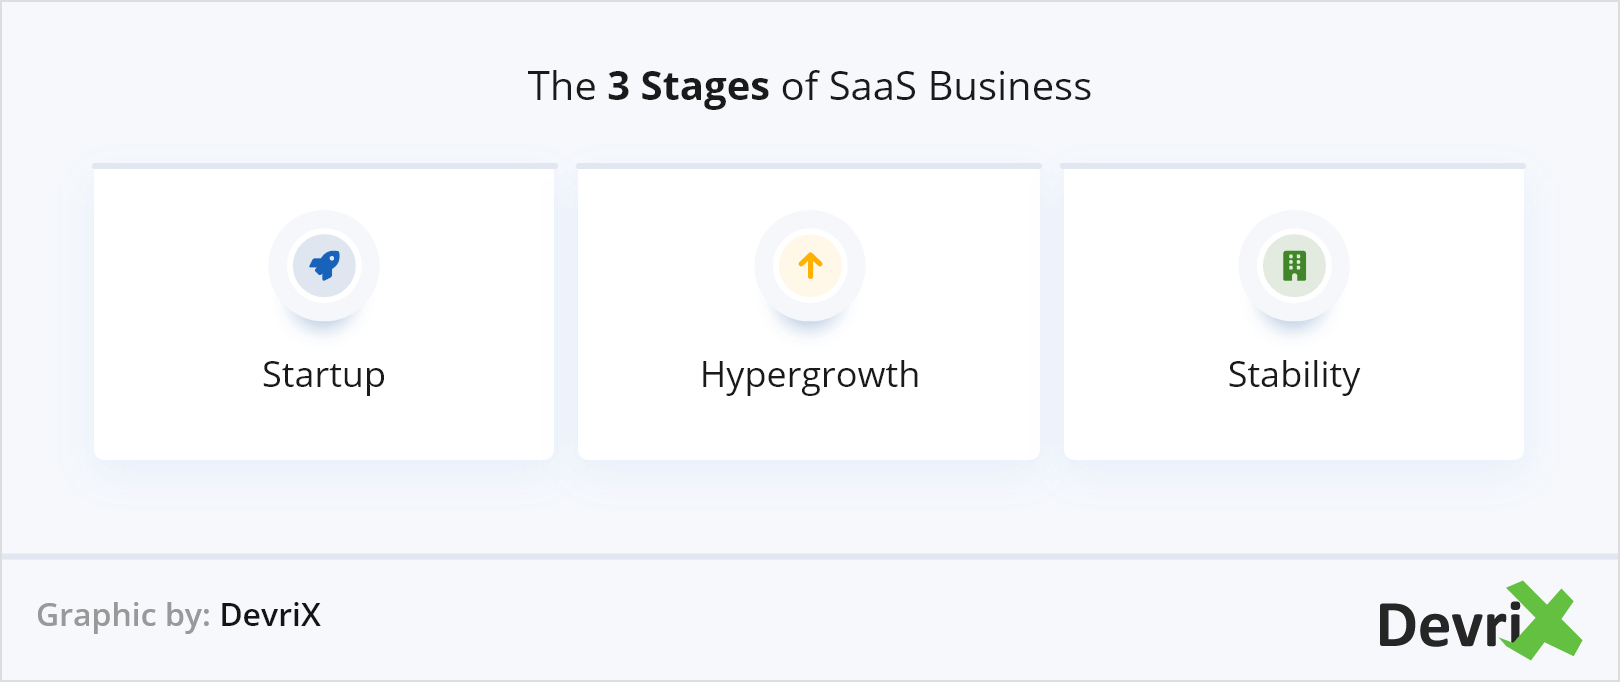 The 3 Stages of SaaS Business